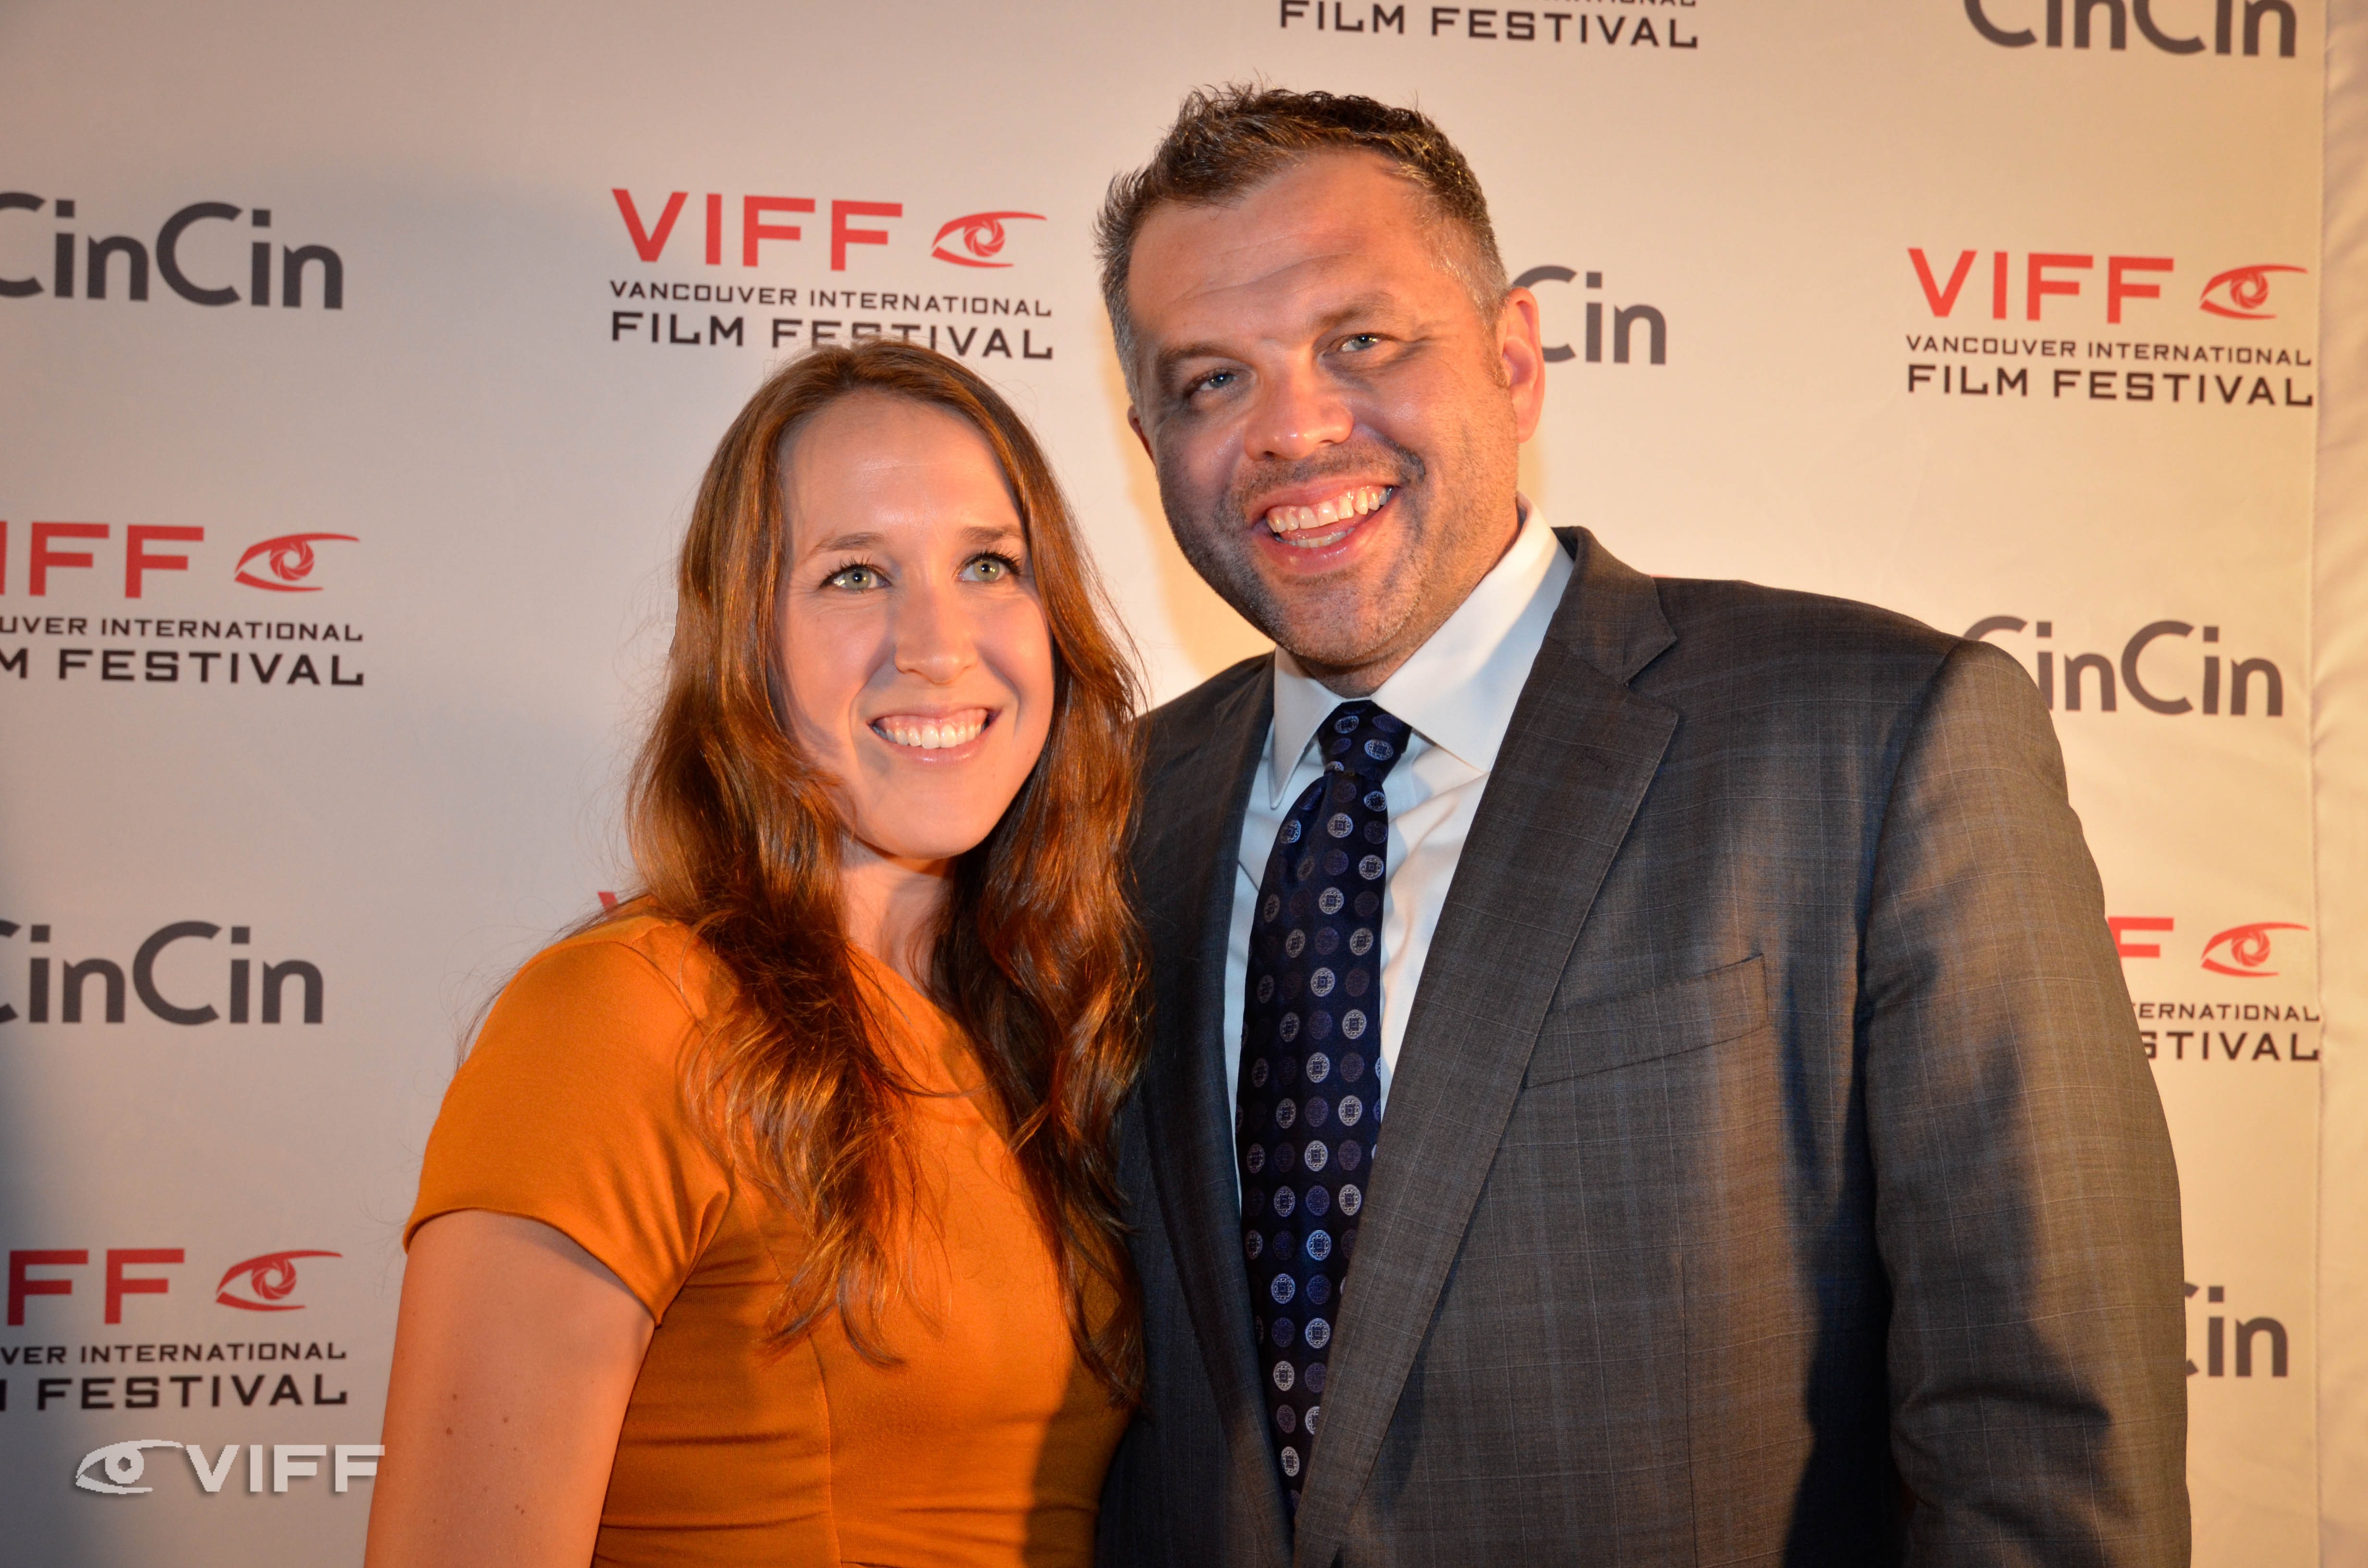 Vancouver International Film Festival 2012 - Photographed with Chris McKenna